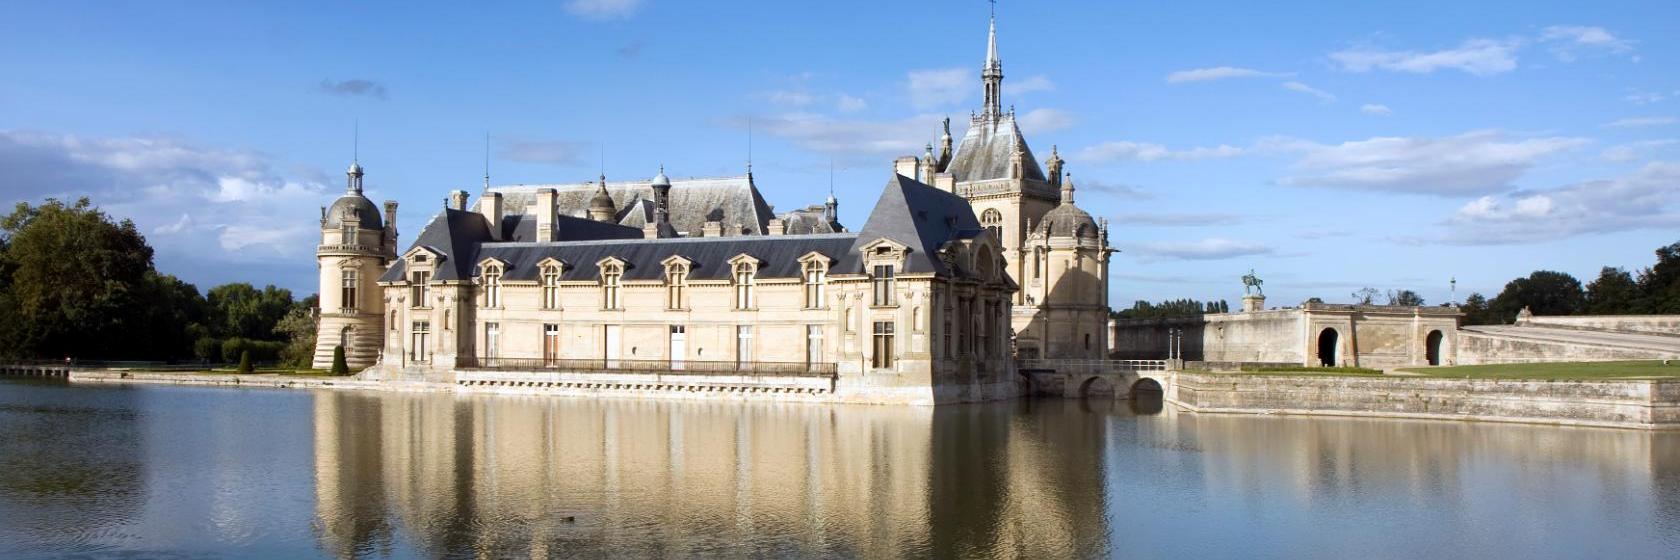 10 Best Chantilly Hotels, France (From $82)